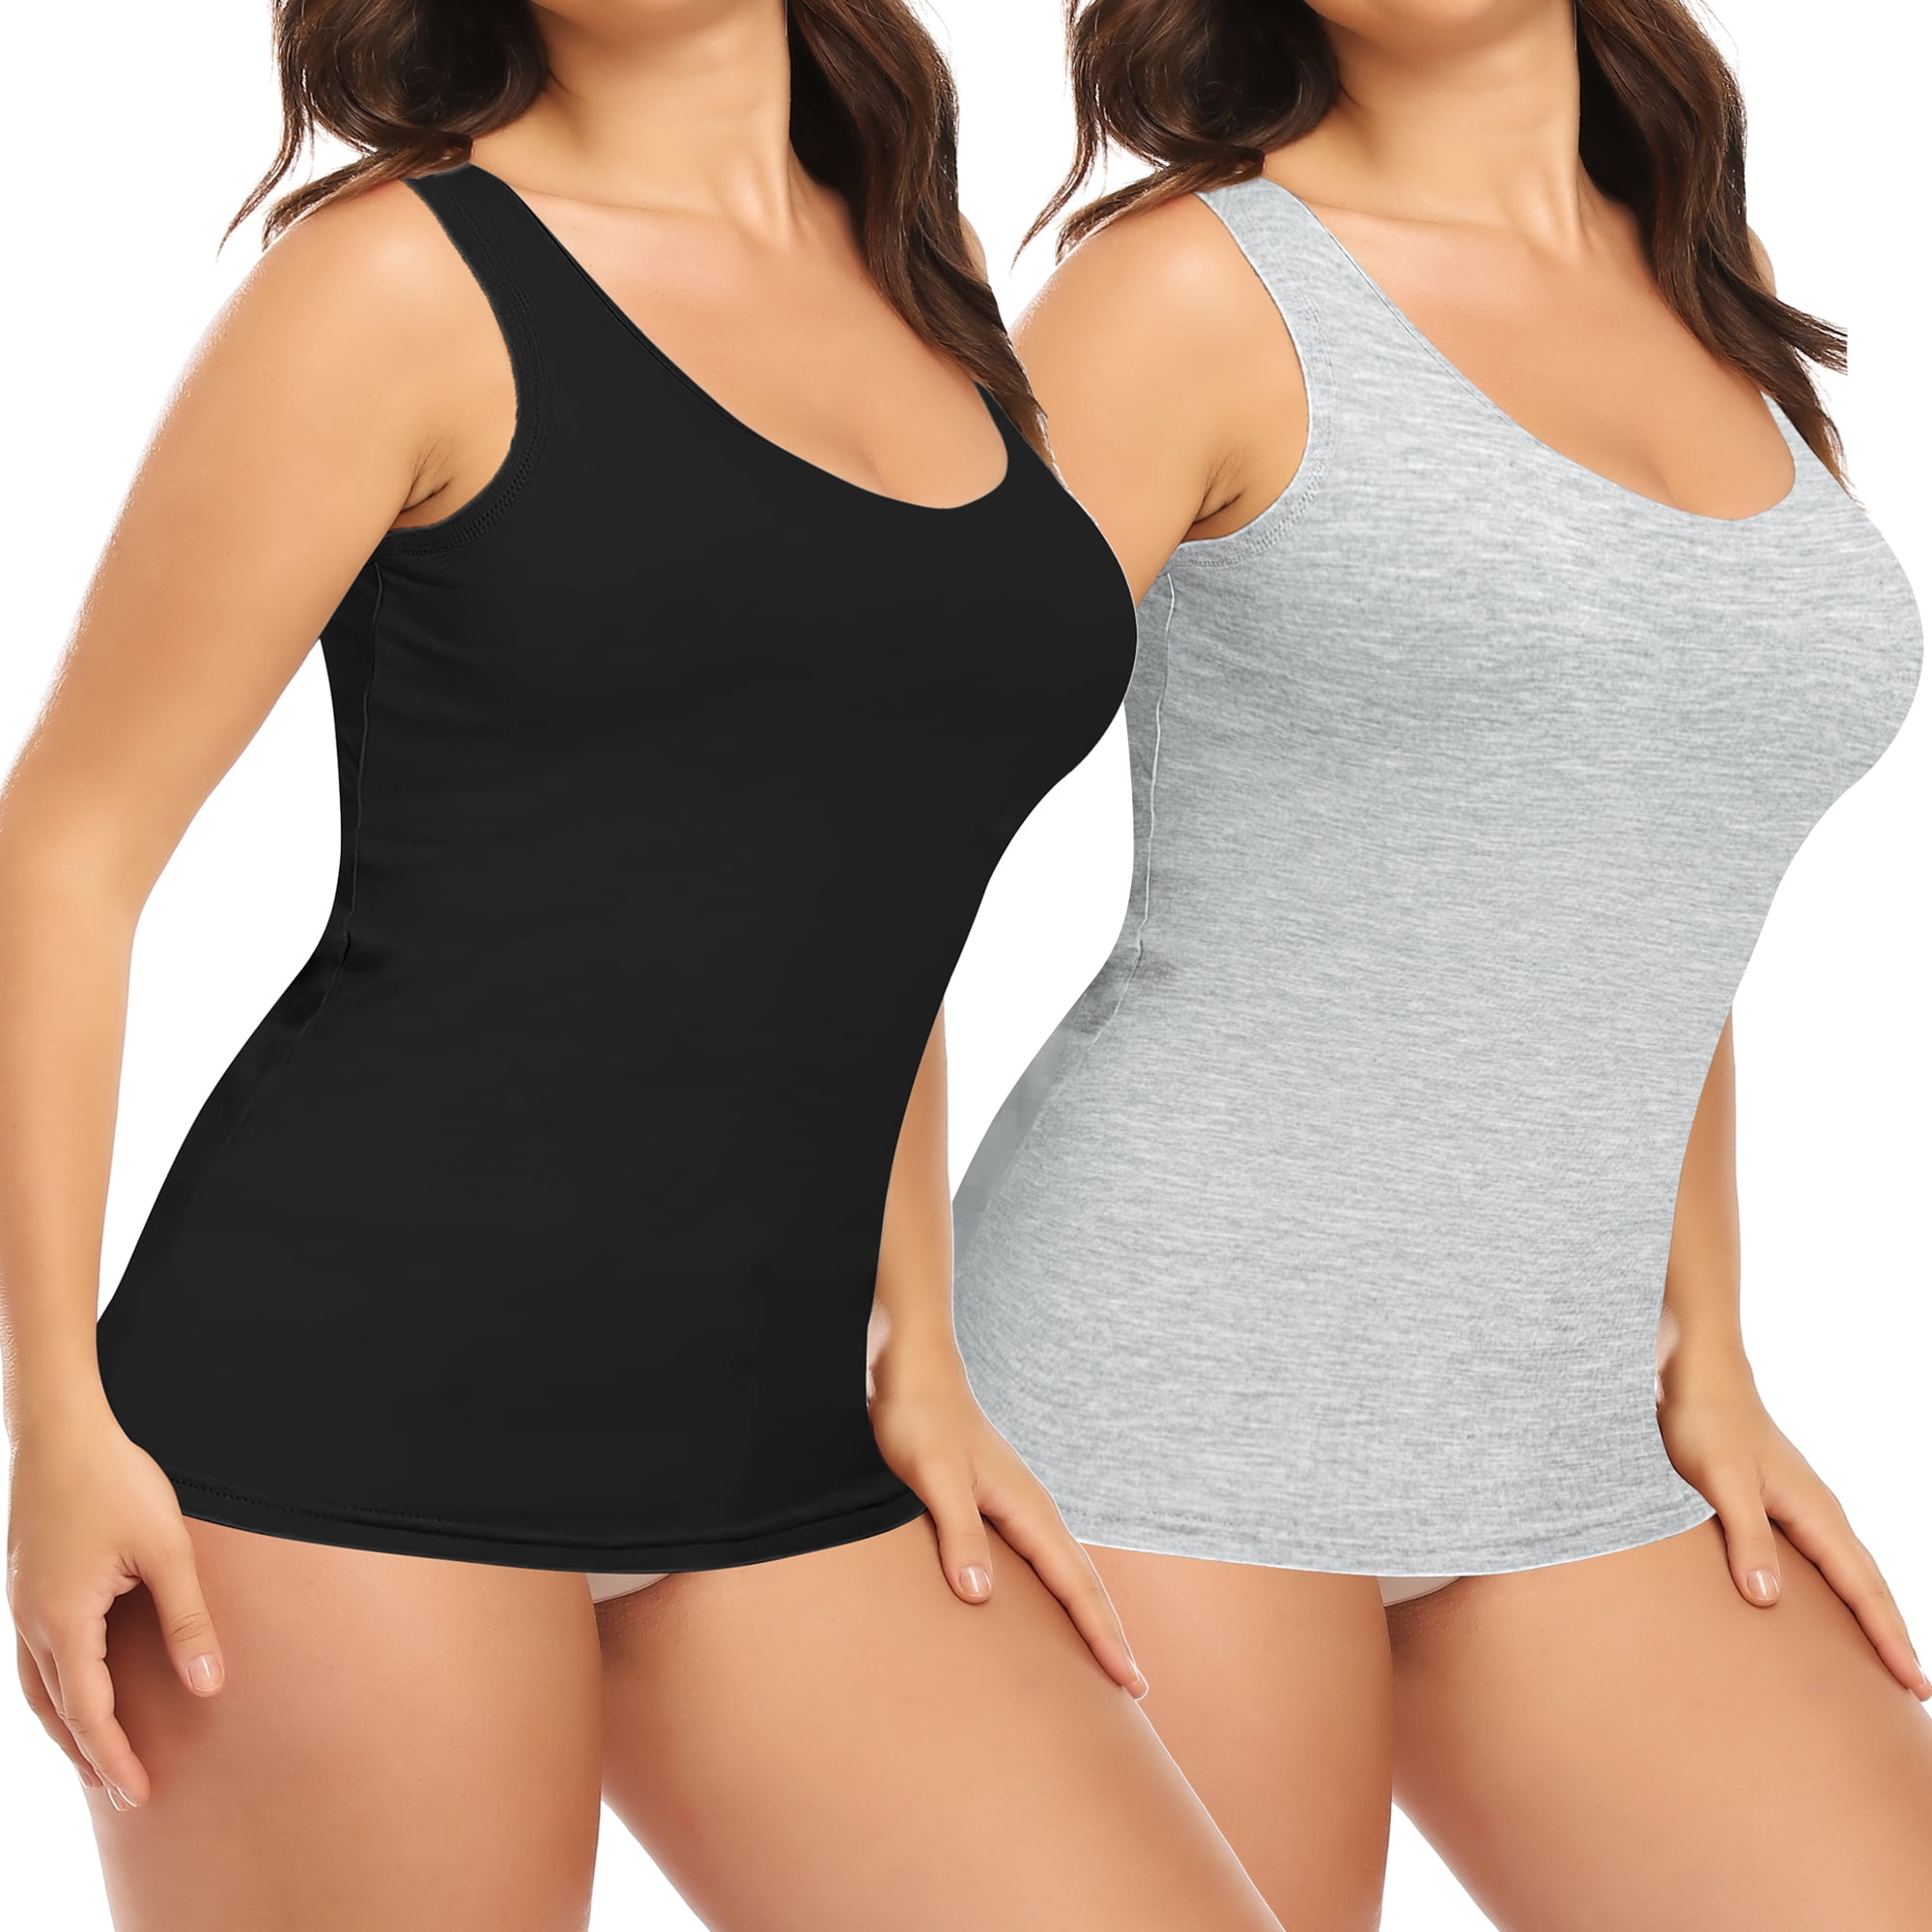 MNBCCXC Slim Fitted Tops For Women Womens Camisole Tank Tops